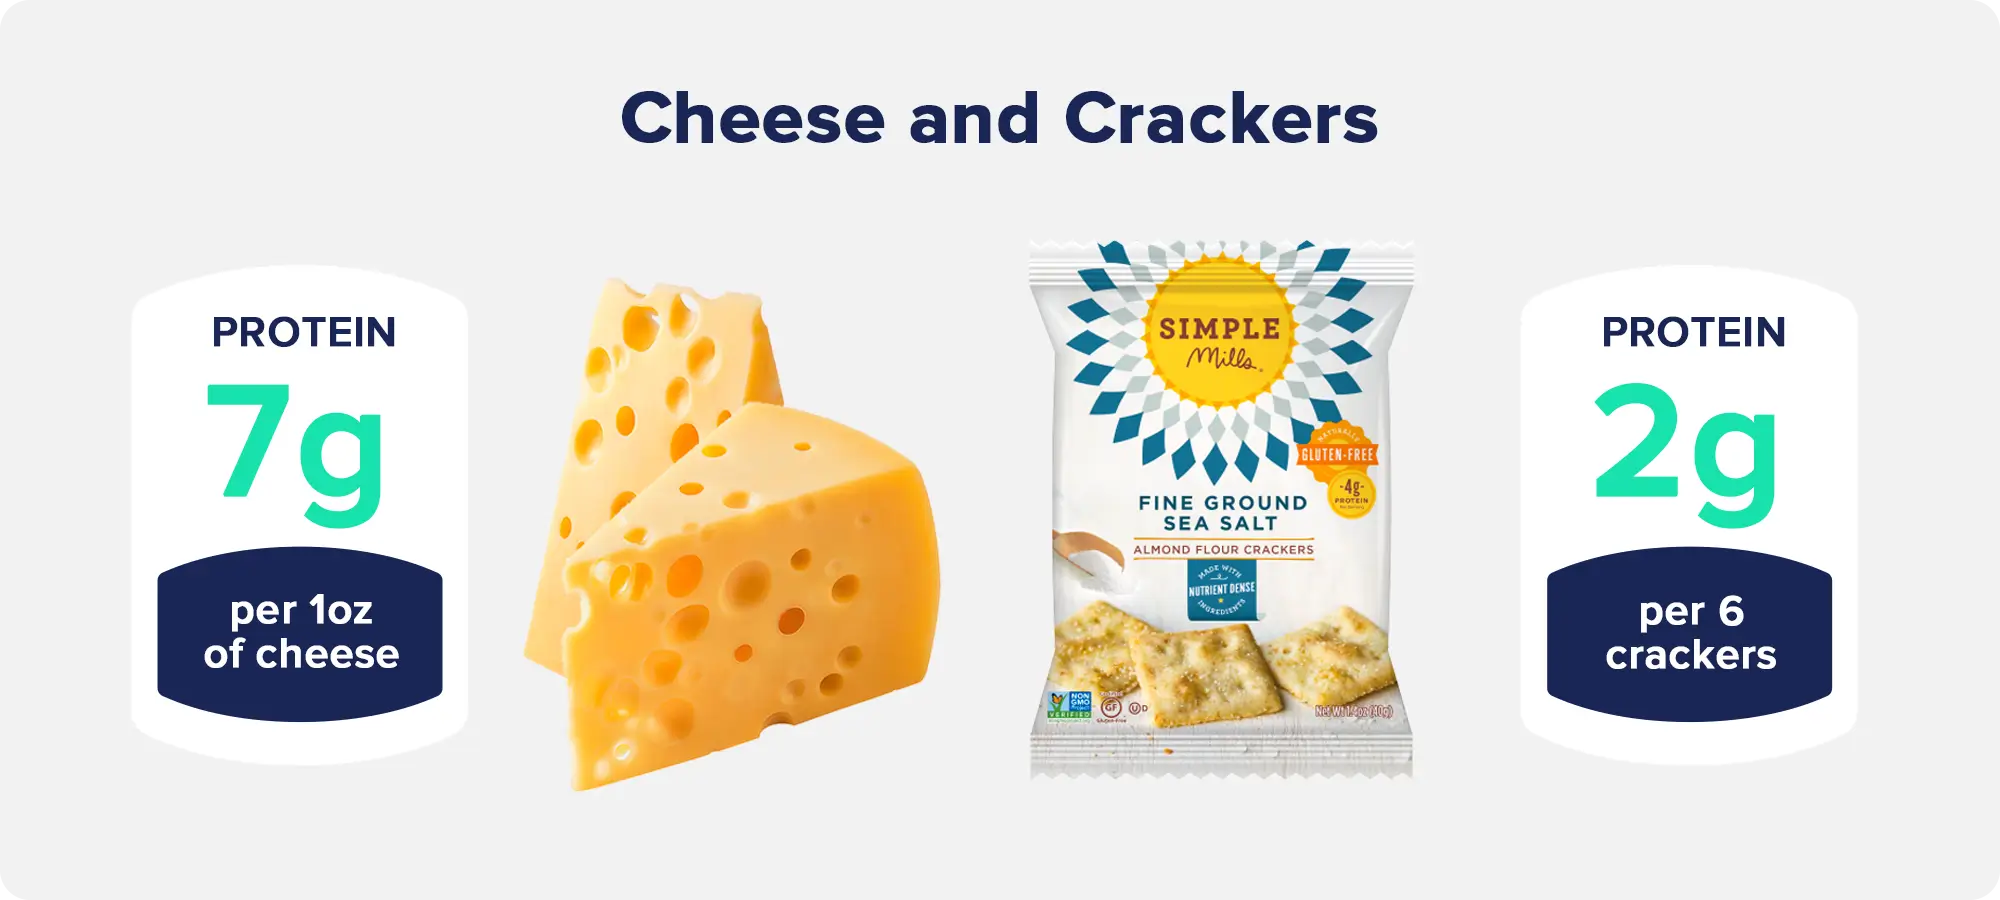 12. Cheese and Crackers